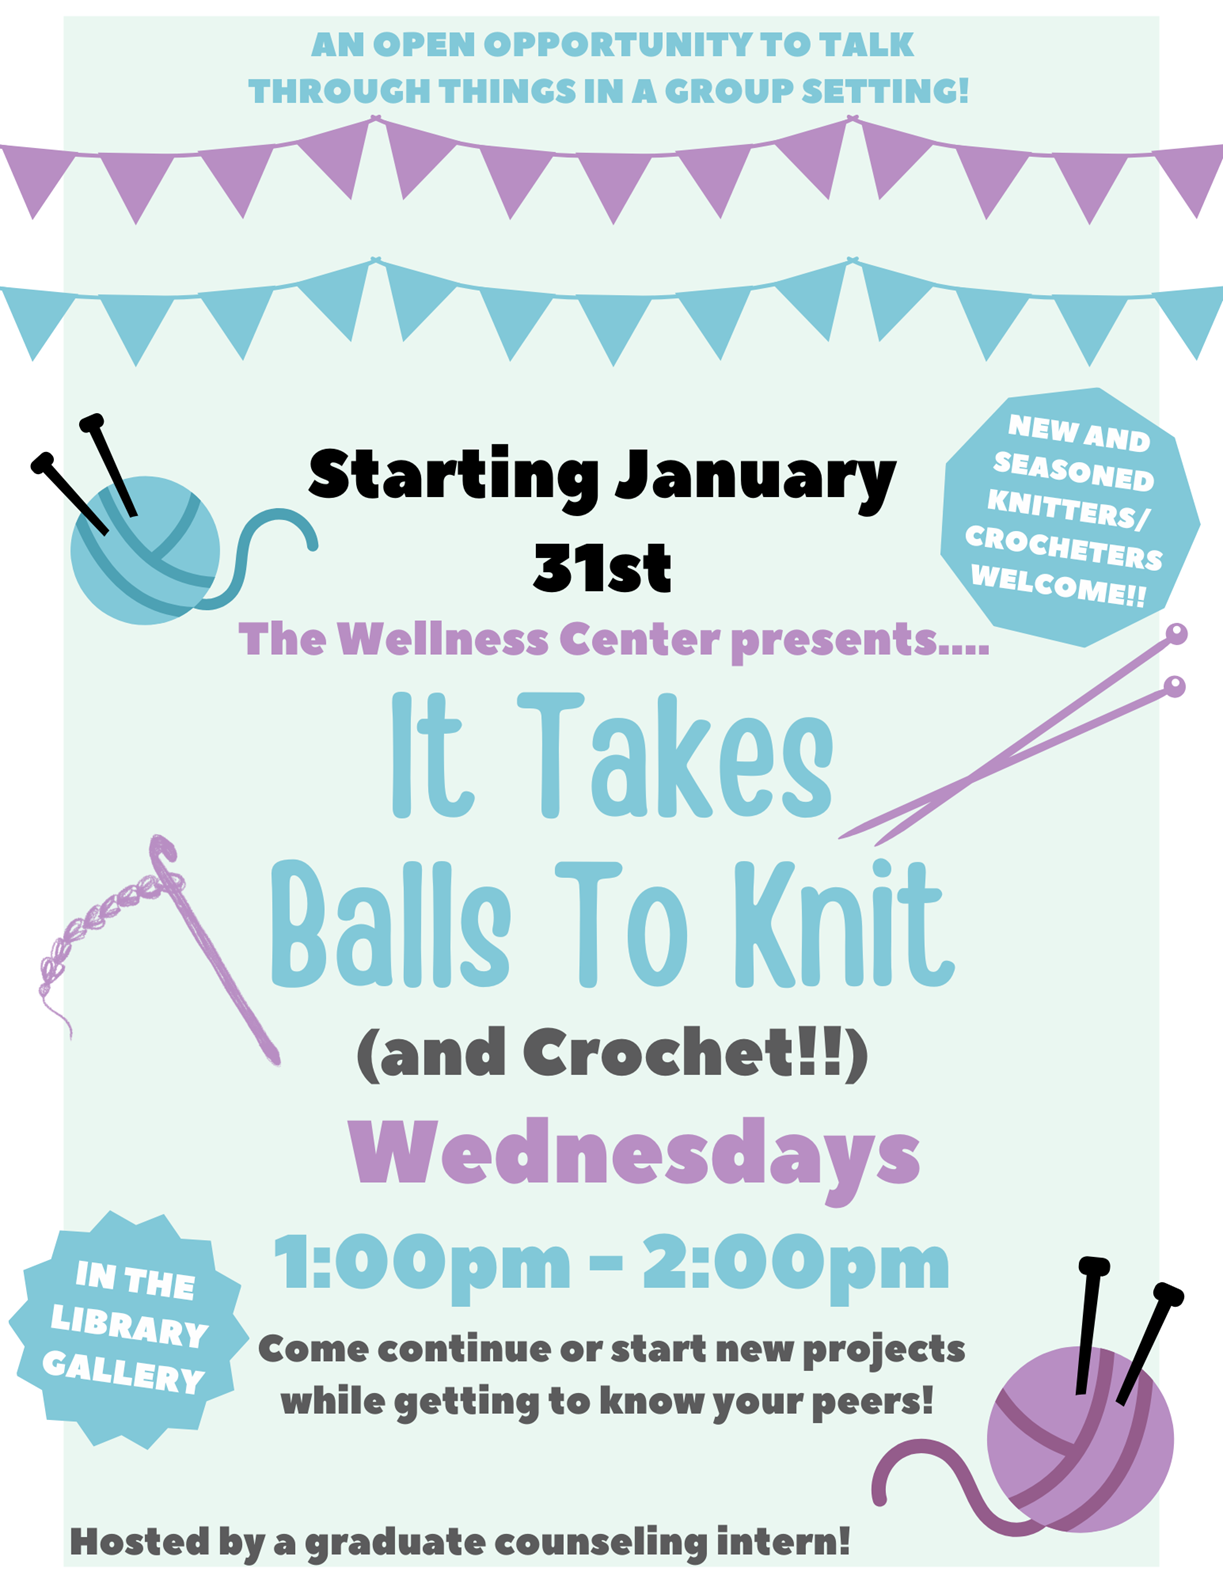 Crochet and Knitting Wednesdays in the Library!